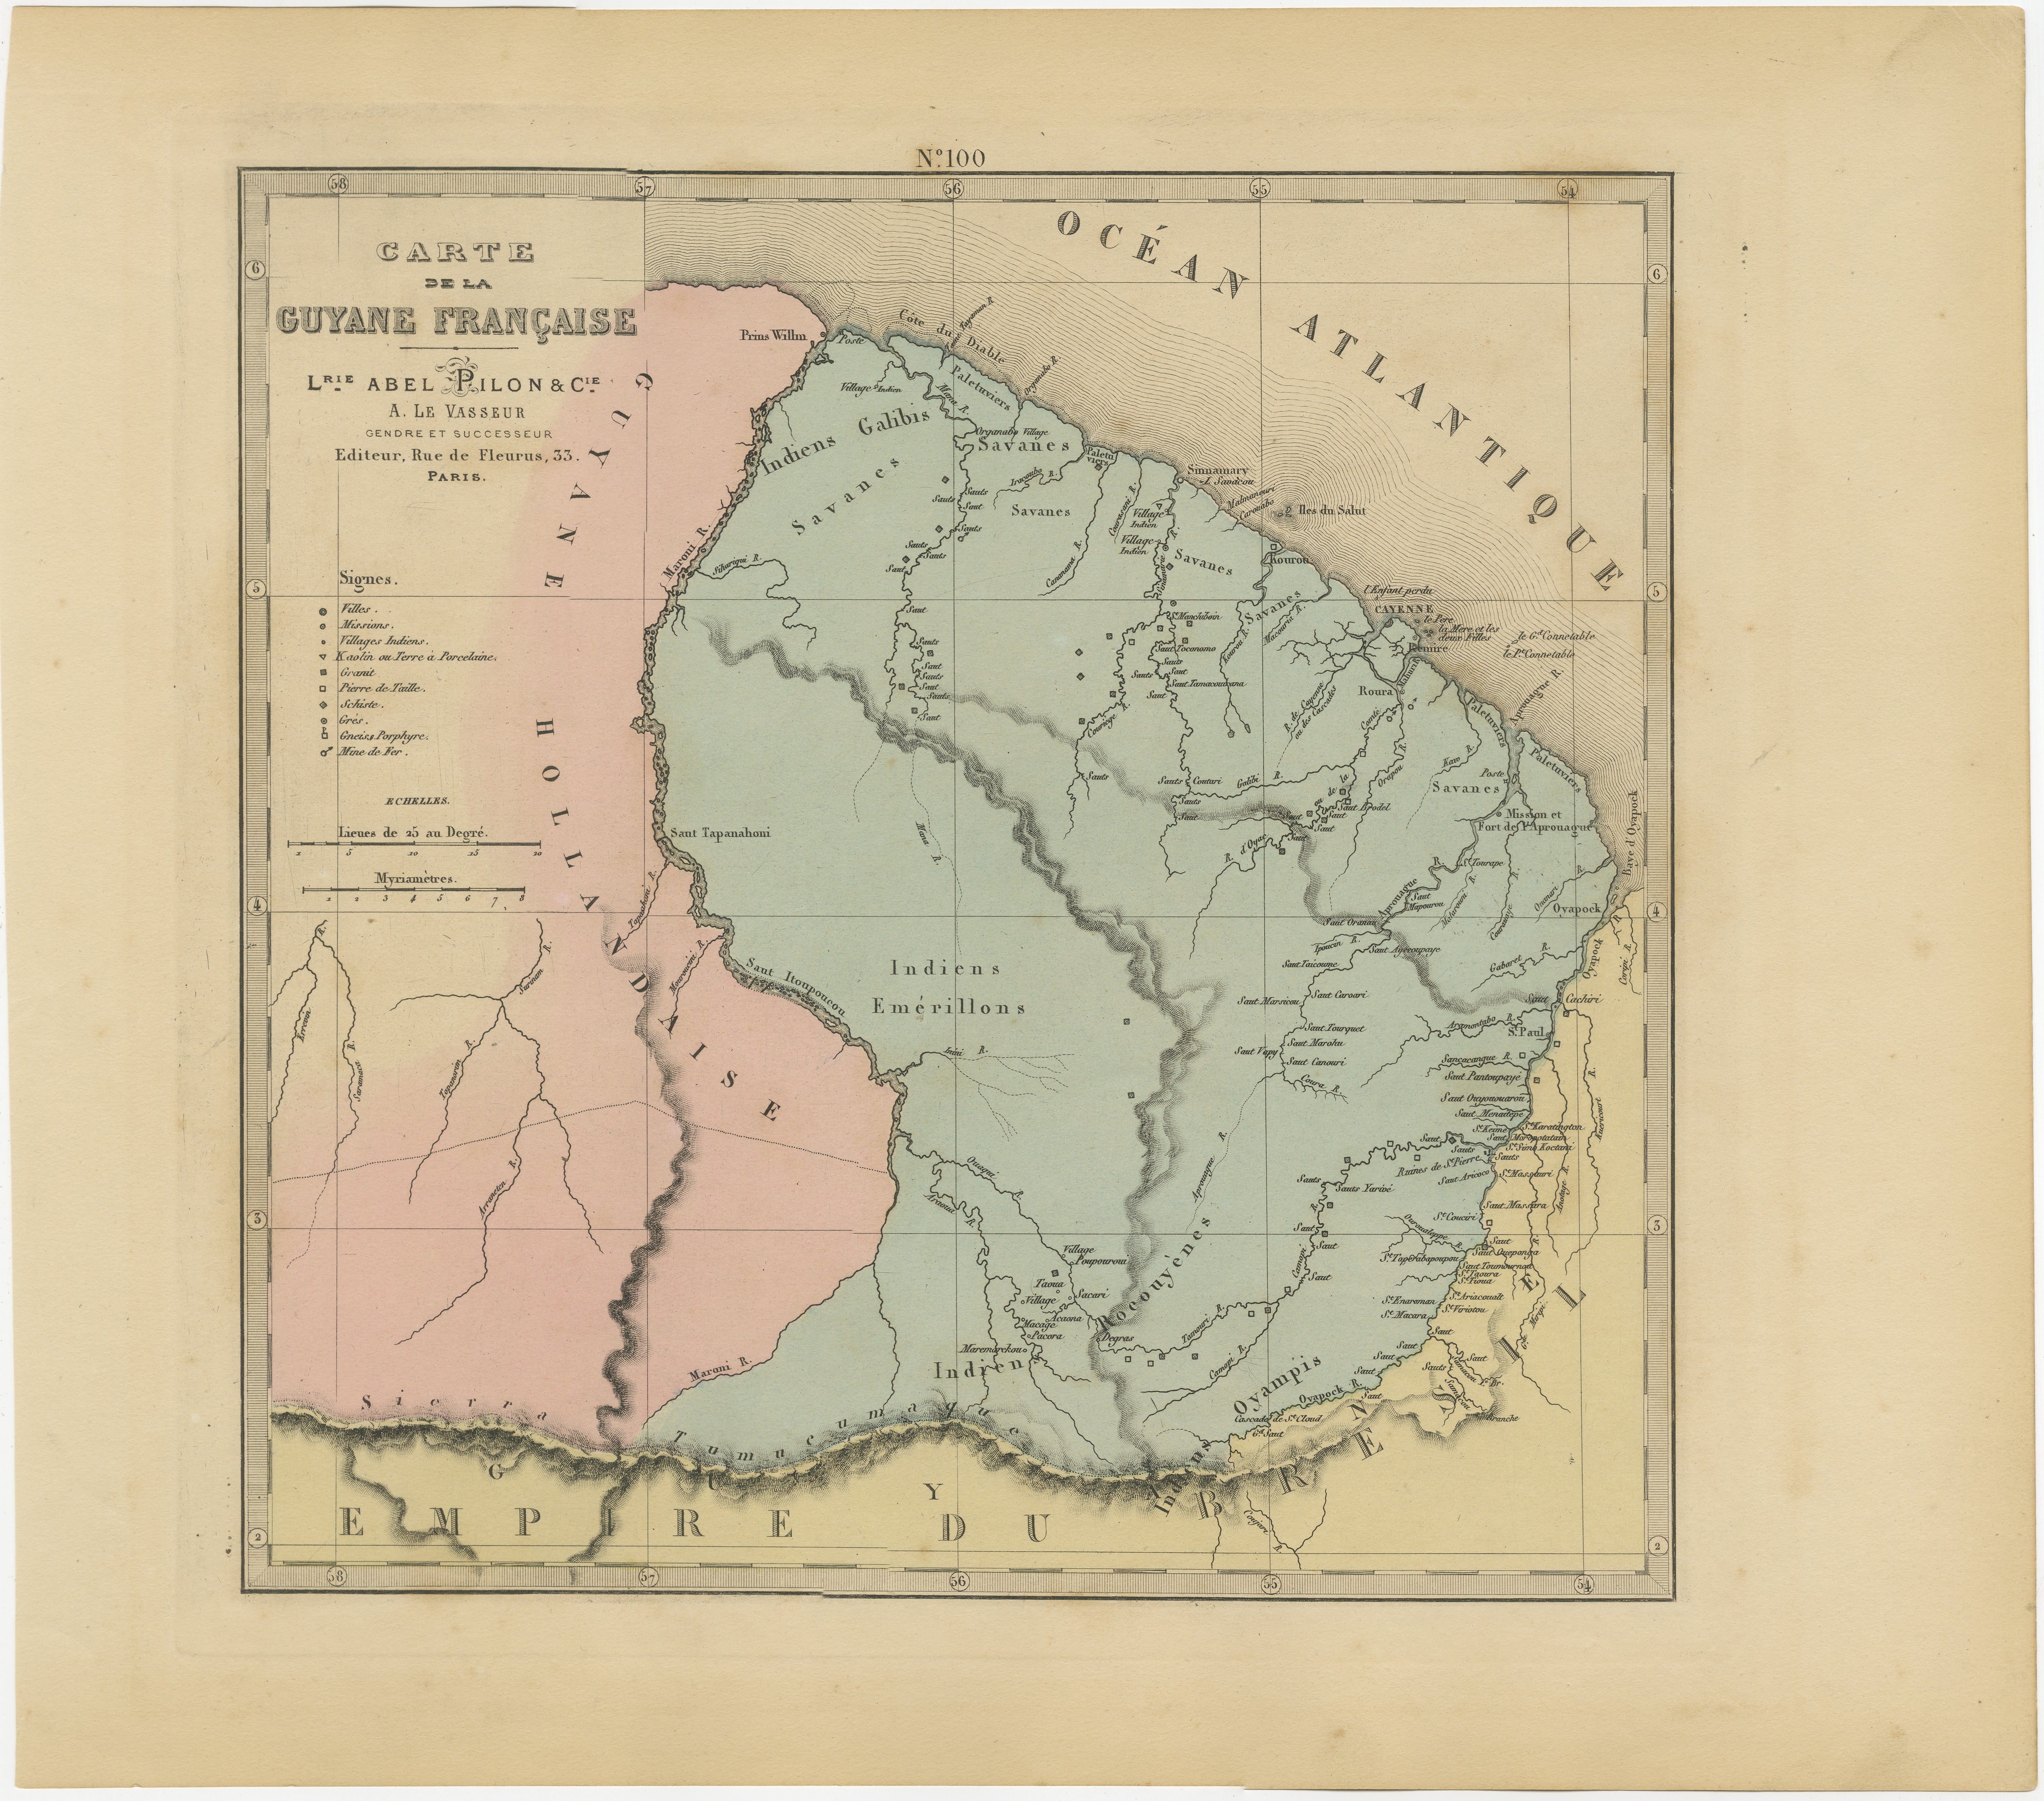 The 1876 map of French Guiana from the 